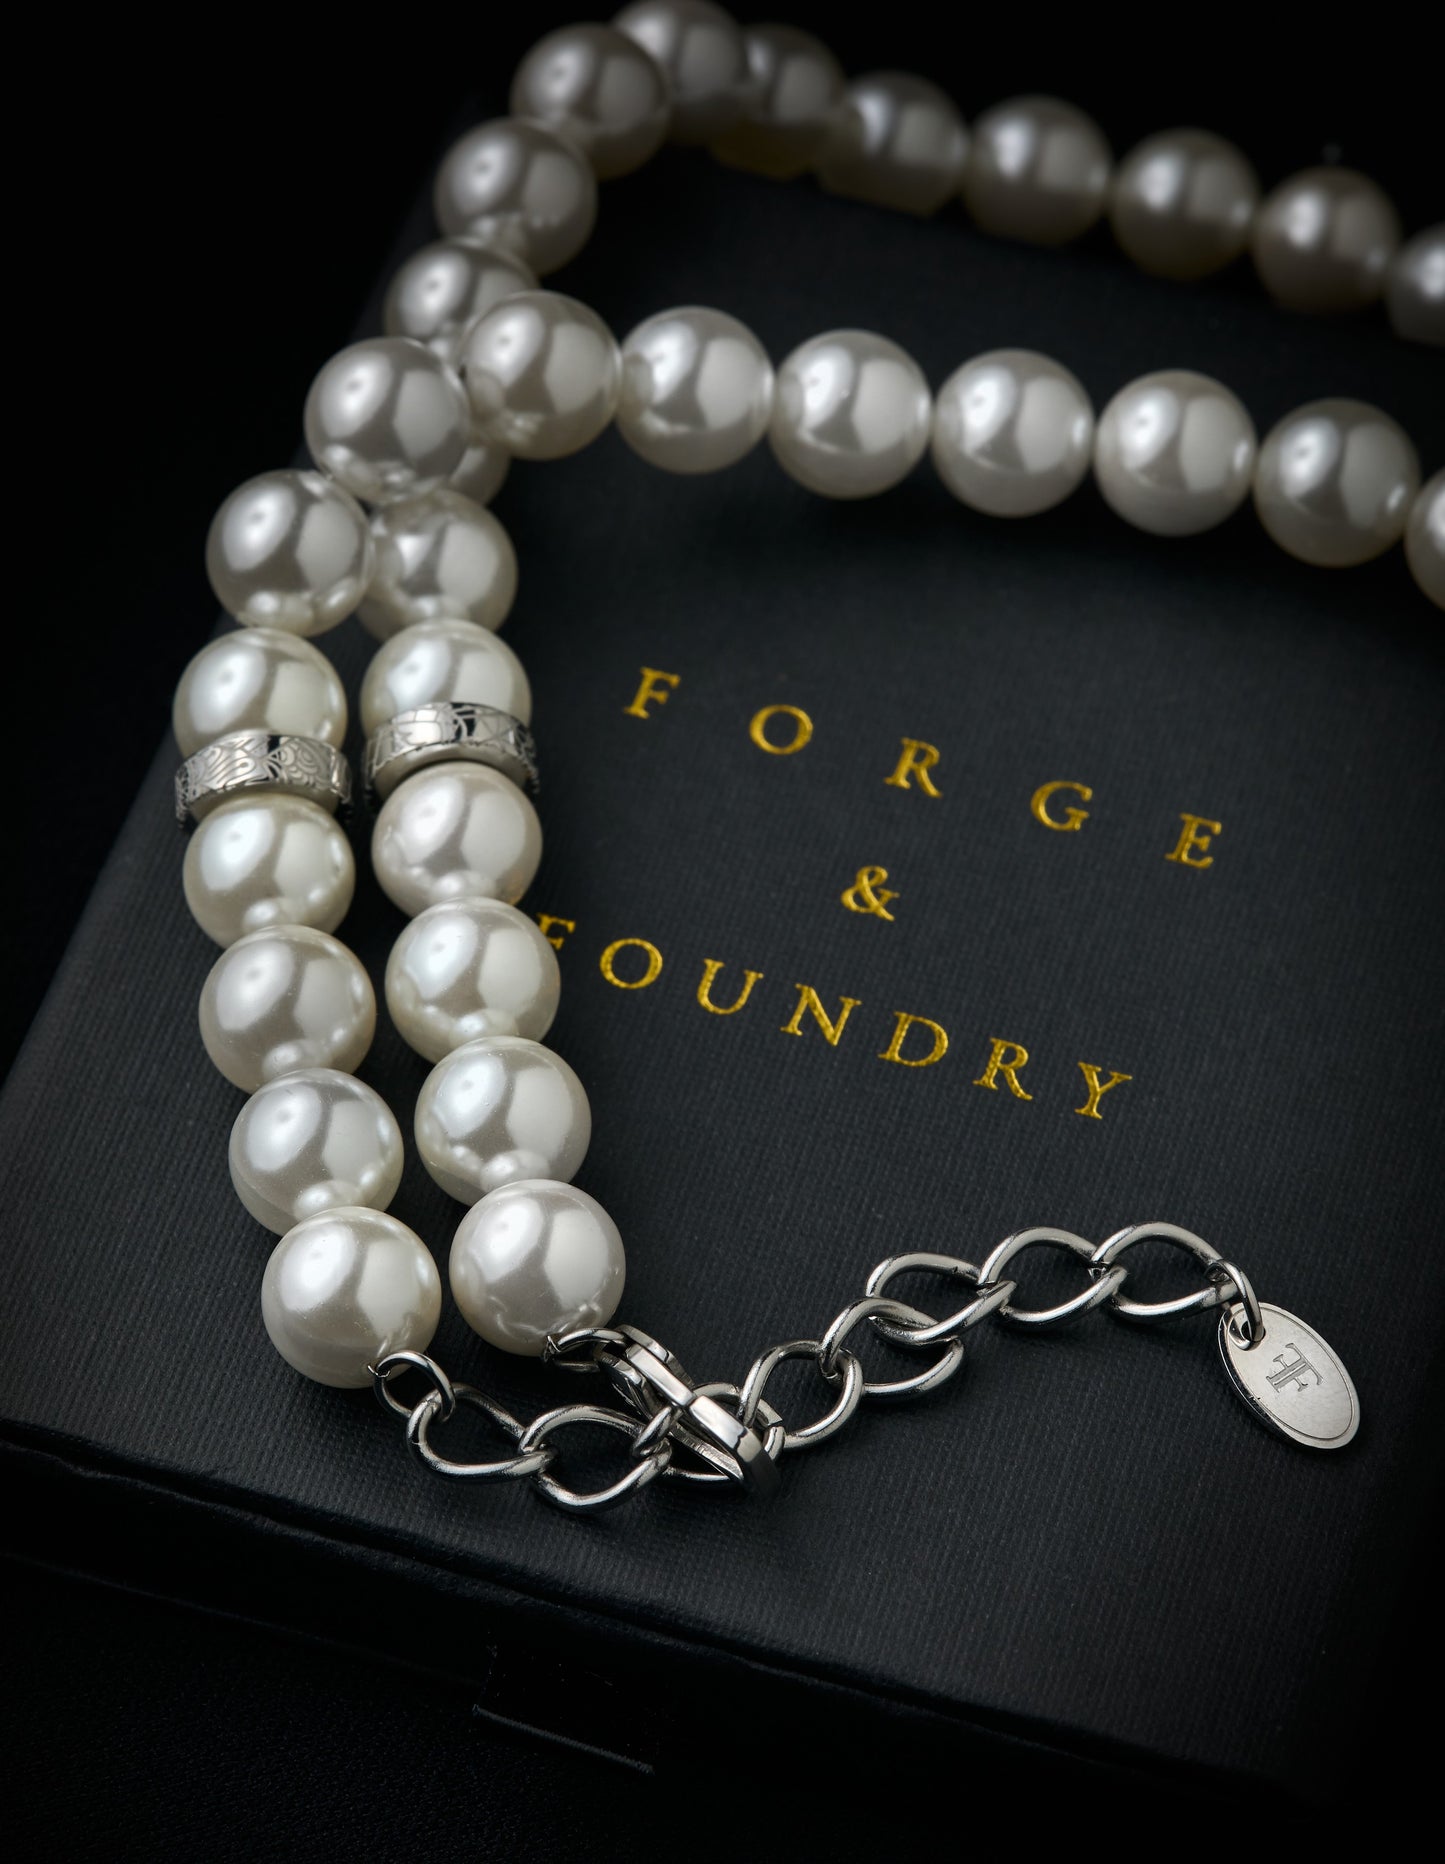 10mm Shell Pearl Necklace "FORTIER" - Silver